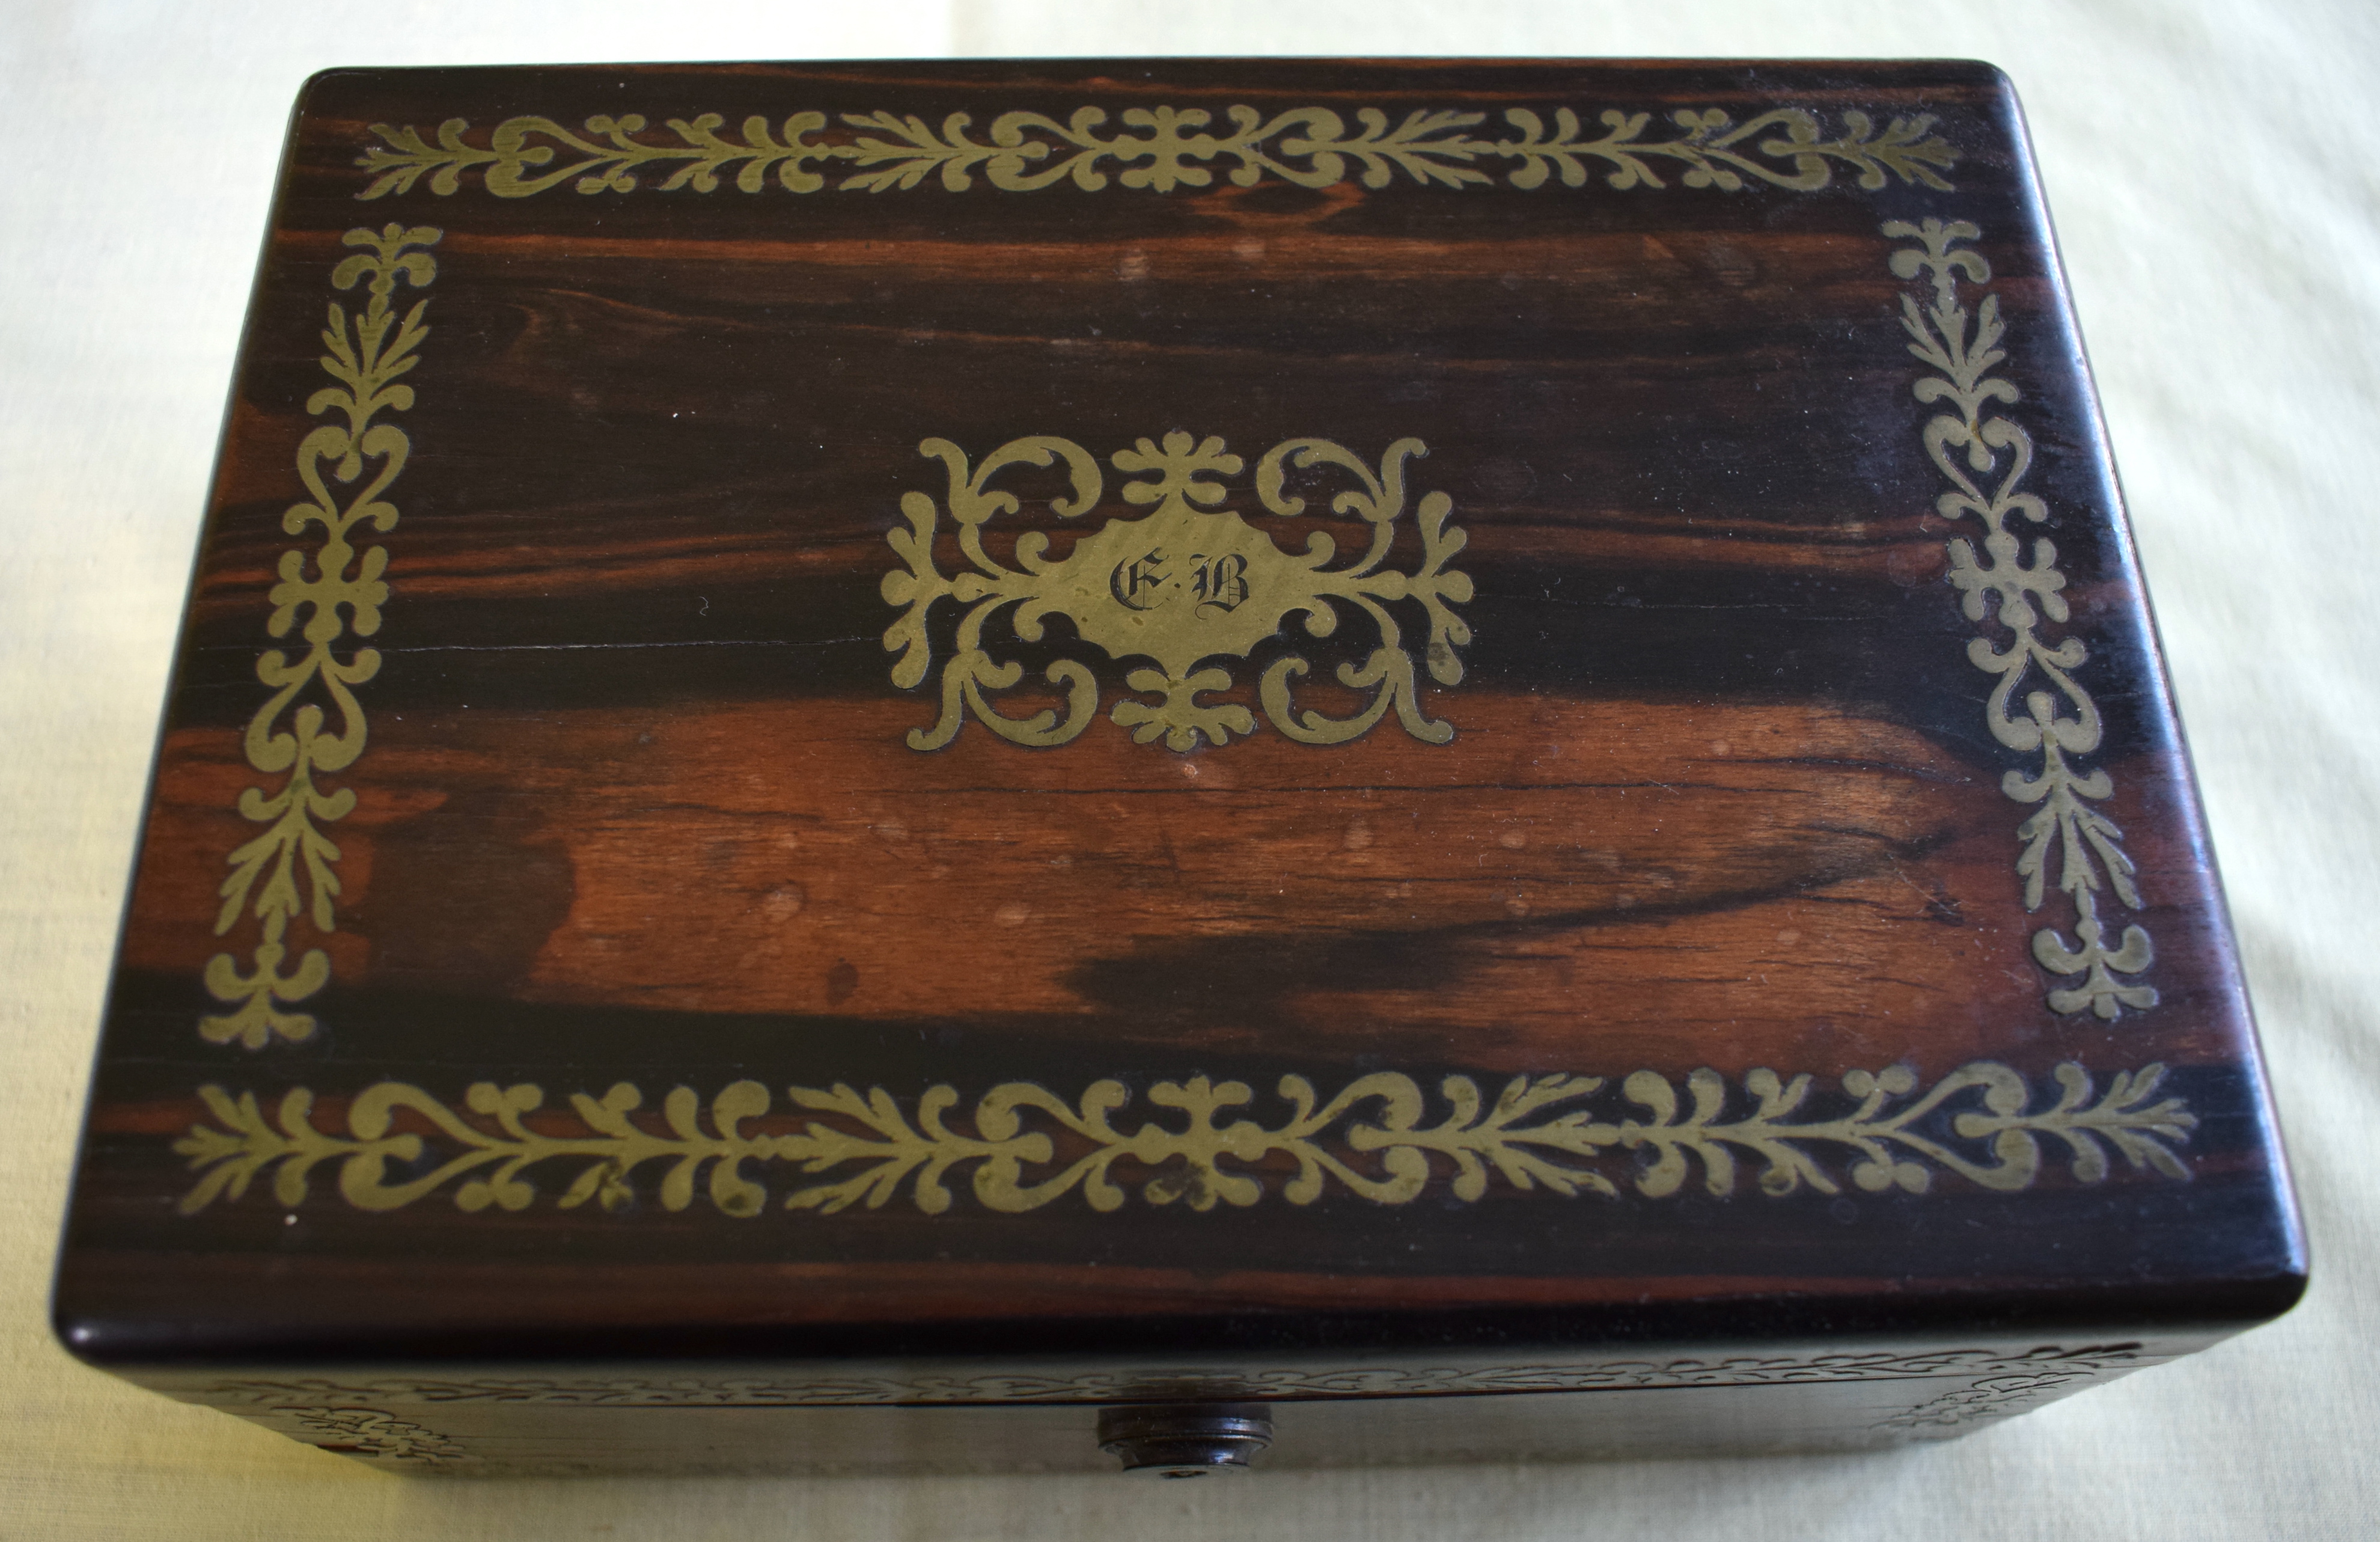 AN EARLY VICTORIAN COROMANDEL BRASS INLAID BOX AND COVER decorated with floral type motifs. 21 cm x - Image 3 of 5